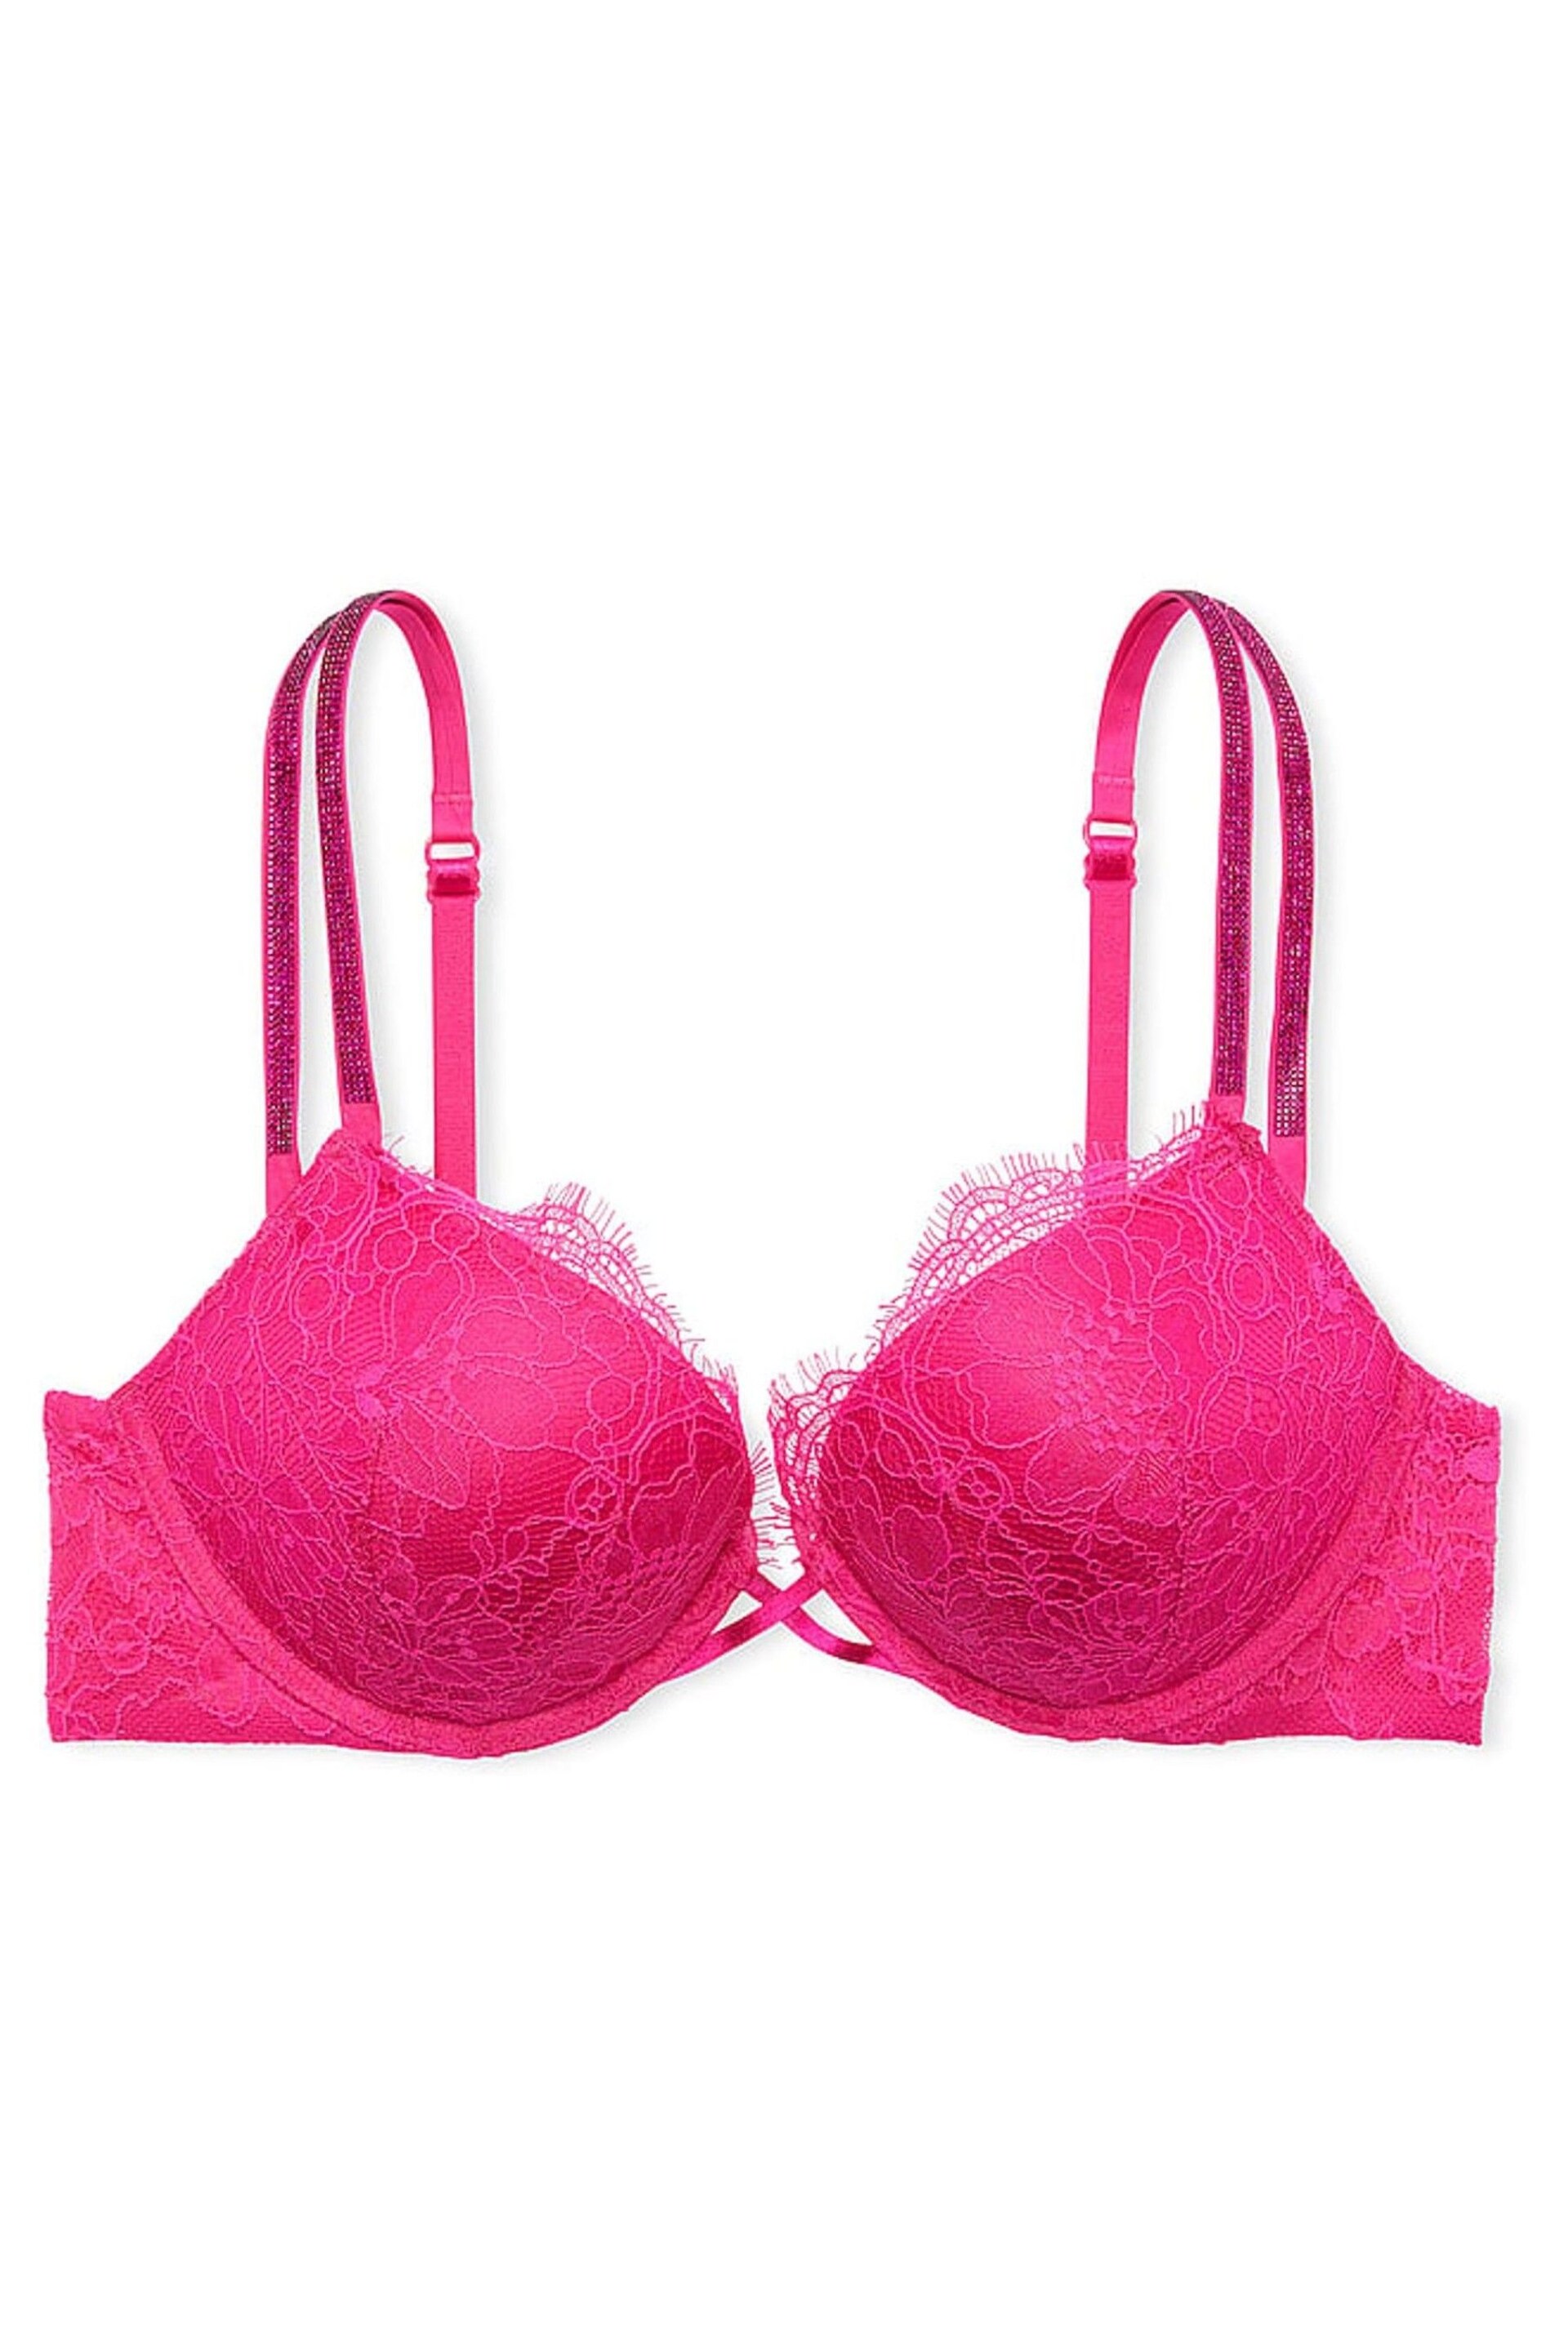 Victoria's Secret Forever Pink Lace Add 2 Cups Push Up Double Shine Strap Add 2 Cups Push Up Bombshell Bra - Image 3 of 3